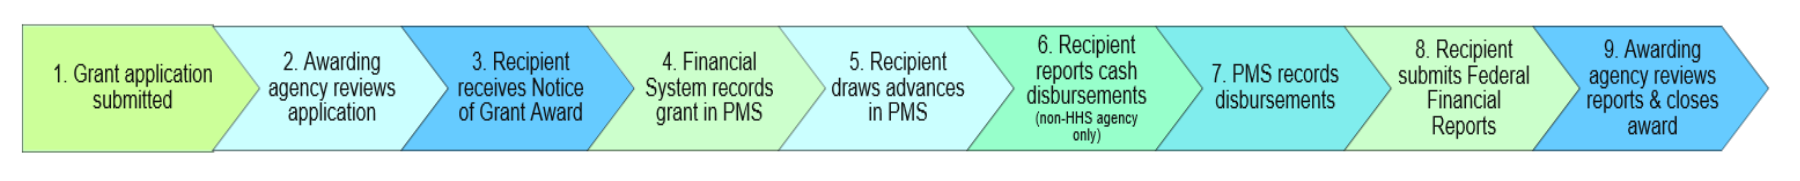 infographic of PMS' grant award and payment cycle